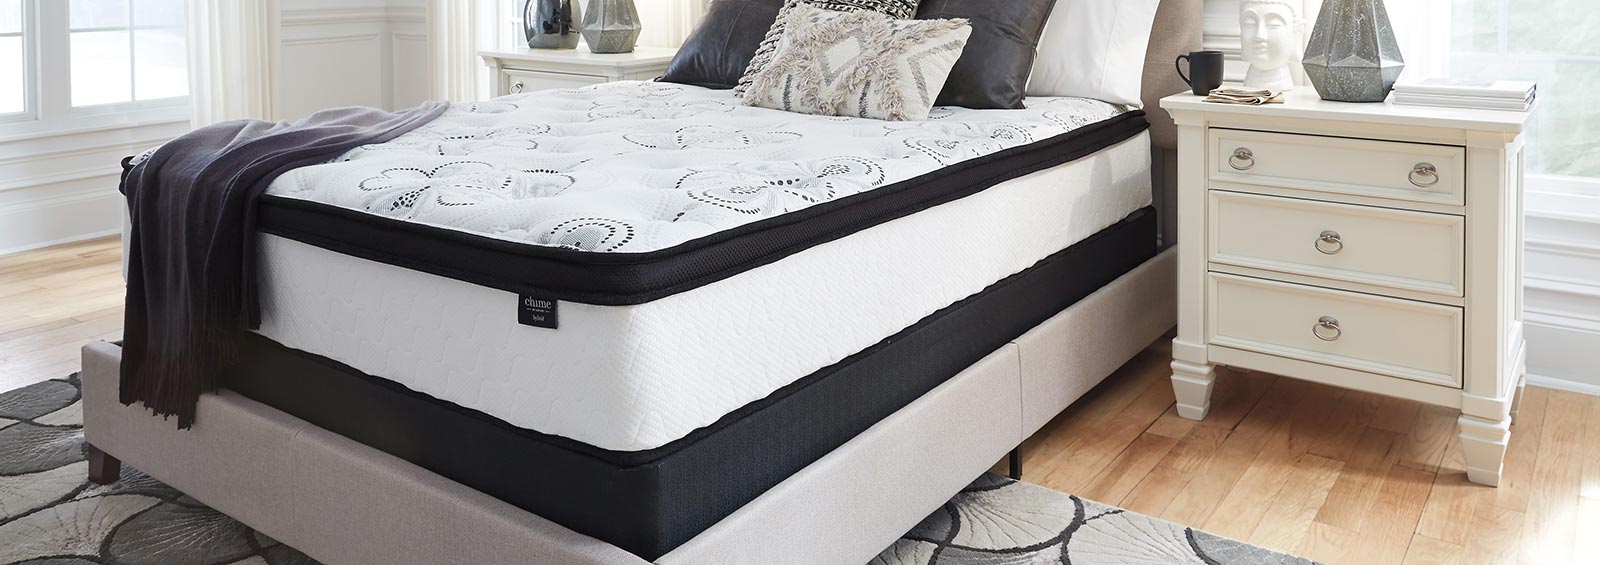 cls direct mattress home furniture and cabinets